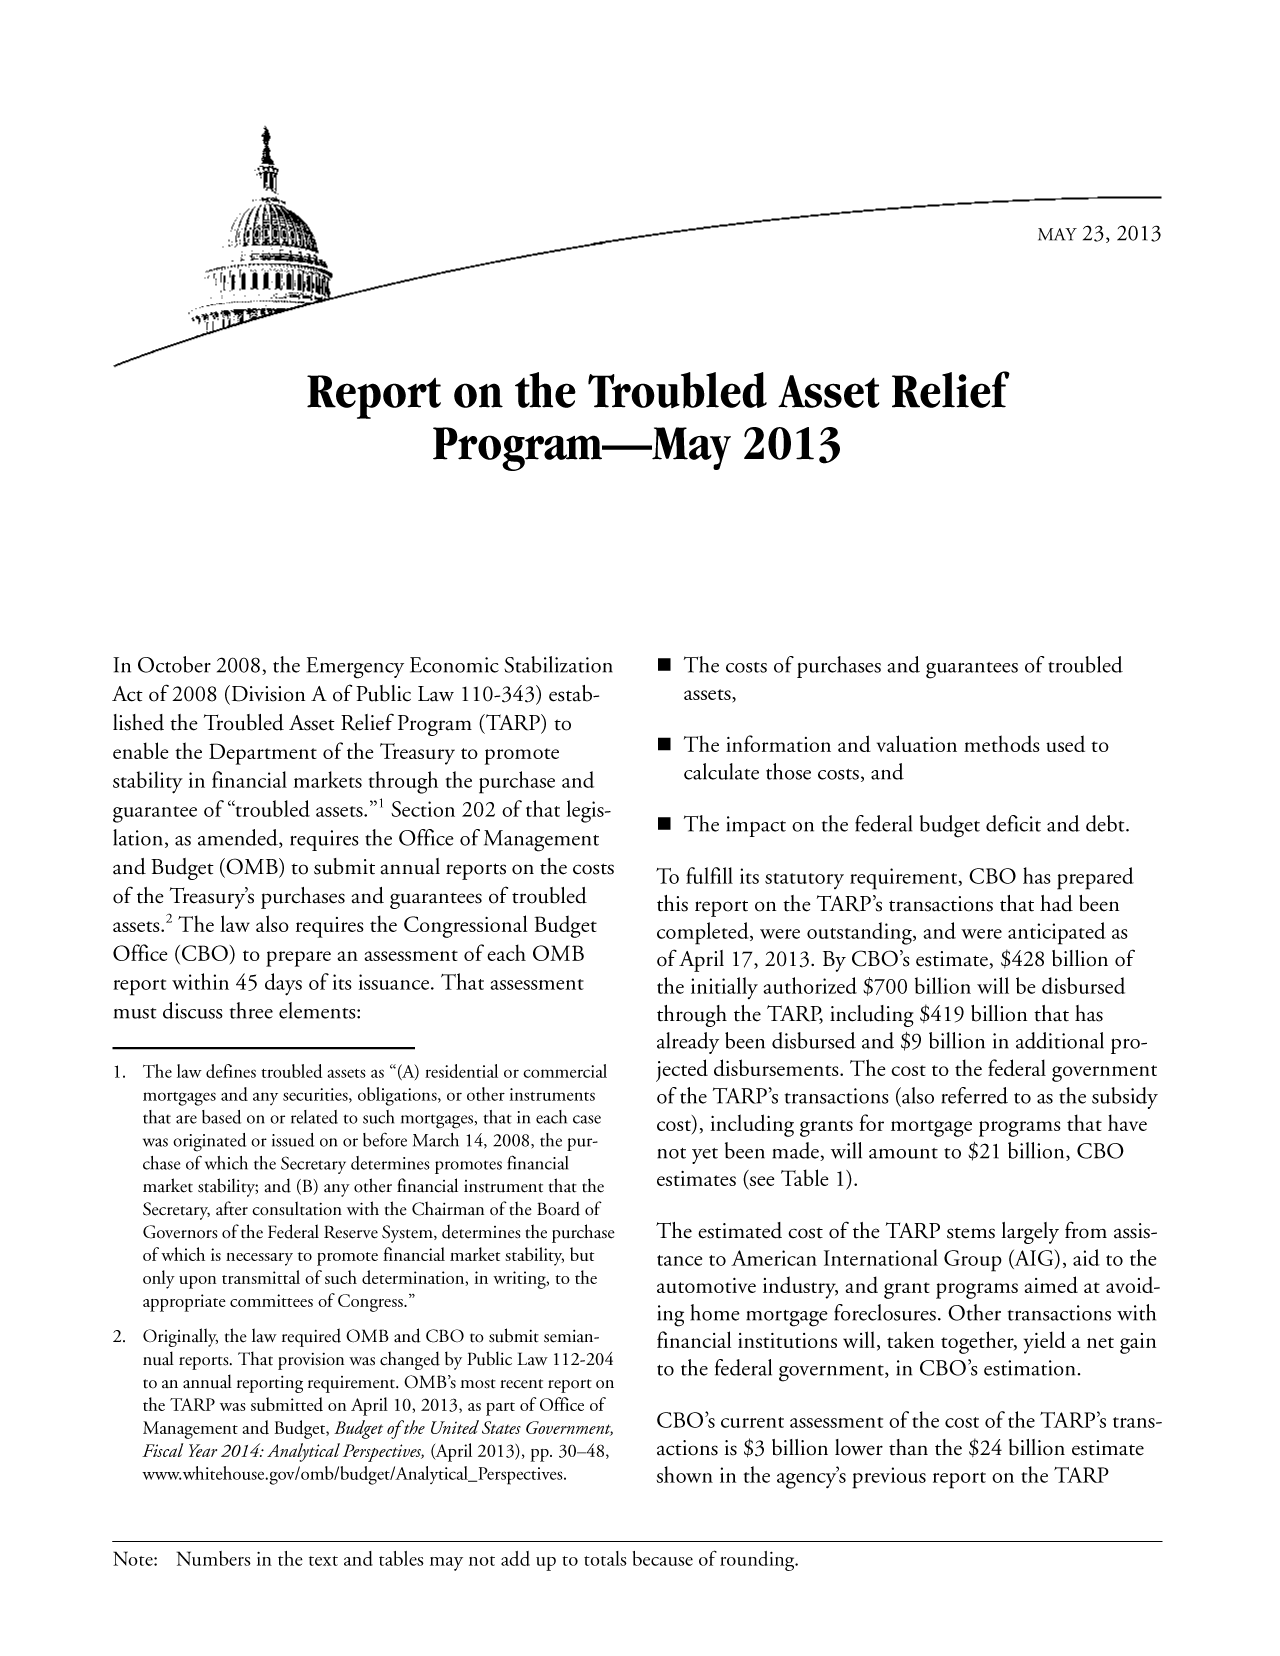 handle is hein.congrec/cbo11156 and id is 1 raw text is: MAY 23, 2013

Report on the Troubled Asset Relief
Program-May 2013

In October 2008, the Emergency Economic Stabilization
Act of 2008 (Division A of Public Law 110-343) estab-
lished the Troubled Asset Relief Program (TARP) to
enable the Department of the Treasury to promote
stability in financial markets through the purchase and
guarantee of troubled assets.' Section 202 of that legis-
lation, as amended, requires the Office of Management
and Budget (OMB) to submit annual reports on the costs
of the Treasury's purchases and guarantees of troubled
assets.2 The law also requires the Congressional Budget
Office (CBO) to prepare an assessment of each OMB
report within 45 days of its issuance. That assessment
must discuss three elements:
1. The law defines troubled assets as (A) residential or commercial
mortgages and any securities, obligations, or other instruments
that are based on or related to such mortgages, that in each case
was originated or issued on or before March 14, 2008, the pur-
chase of which the Secretary determines promotes financial
market stability; and (B) any other financial instrument that the
Secretary, after consultation with the Chairman of the Board of
Governors of the Federal Reserve System, determines the purchase
of which is necessary to promote financial market stability, but
only upon transmittal of such determination, in writing, to the
appropriate committees of Congress.
2. Originally, the law required OMB and CBO to submit semian-
nual reports. That provision was changed by Public Law 112-204
to an annual reporting requirement. OMB's most recent report on
the TARP was submitted on April 10, 2013, as part of Office of
Management and Budget, Budget of the United States Government,
Fiscal Year 2014: Analytical Perspectives, (April 2013), pp. 30-48,
www.whitehouse.gov/omb/budget/Analytical-Perspectives.

 The costs of purchases and guarantees of troubled
assets,
 The information and valuation methods used to
calculate those costs, and
 The impact on the federal budget deficit and debt.
To fulfill its statutory requirement, CBO has prepared
this report on the TARP's transactions that had been
completed, were outstanding, and were anticipated as
of April 17, 2013. By CBO's estimate, $428 billion of
the initially authorized $700 billion will be disbursed
through the TARP, including $419 billion that has
already been disbursed and $9 billion in additional pro-
jected disbursements. The cost to the federal government
of the TARP's transactions (also referred to as the subsidy
cost), including grants for mortgage programs that have
not yet been made, will amount to $21 billion, CBO
estimates (see Table 1).
The estimated cost of the TARP stems largely from assis-
tance to American International Group (AIG), aid to the
automotive industry, and grant programs aimed at avoid-
ing home mortgage foreclosures. Other transactions with
financial institutions will, taken together, yield a net gain
to the federal government, in CBO's estimation.
CBO's current assessment of the cost of the TARP's trans-
actions is $3 billion lower than the $24 billion estimate
shown in the agency's previous report on the TARP

Note: Numbers in the text and tables may not add up to totals because of rounding.


